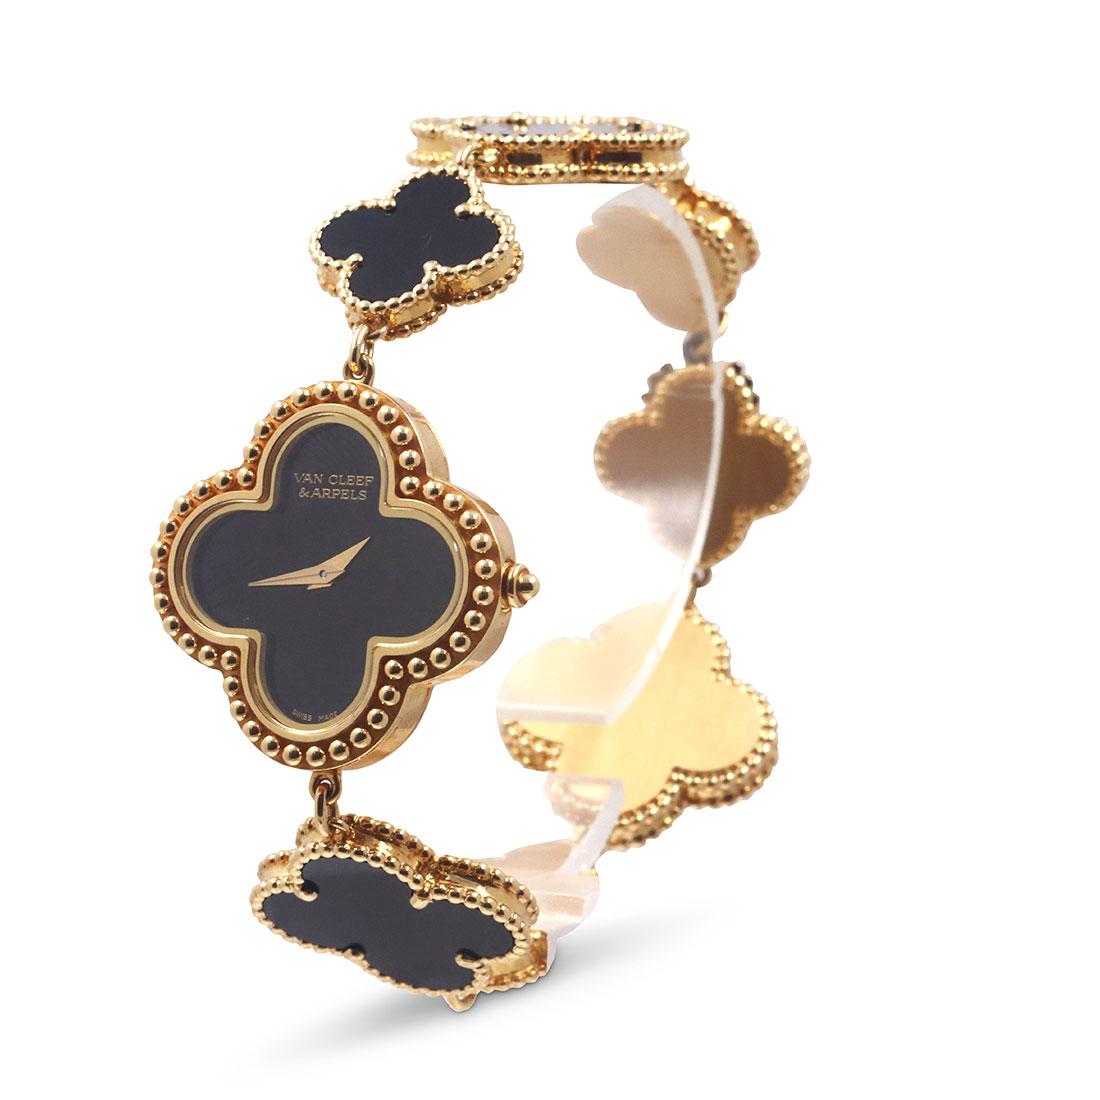 Authentic Van Cleef & Arpels Alhambra watch crafted in 18 karat yellow gold and onyx.  The watch features a clover-shaped carved onyx dial with a 26mm x 26mm case, bezel, and crown of 18 karat yellow gold.  The bracelet features seven carved onyx